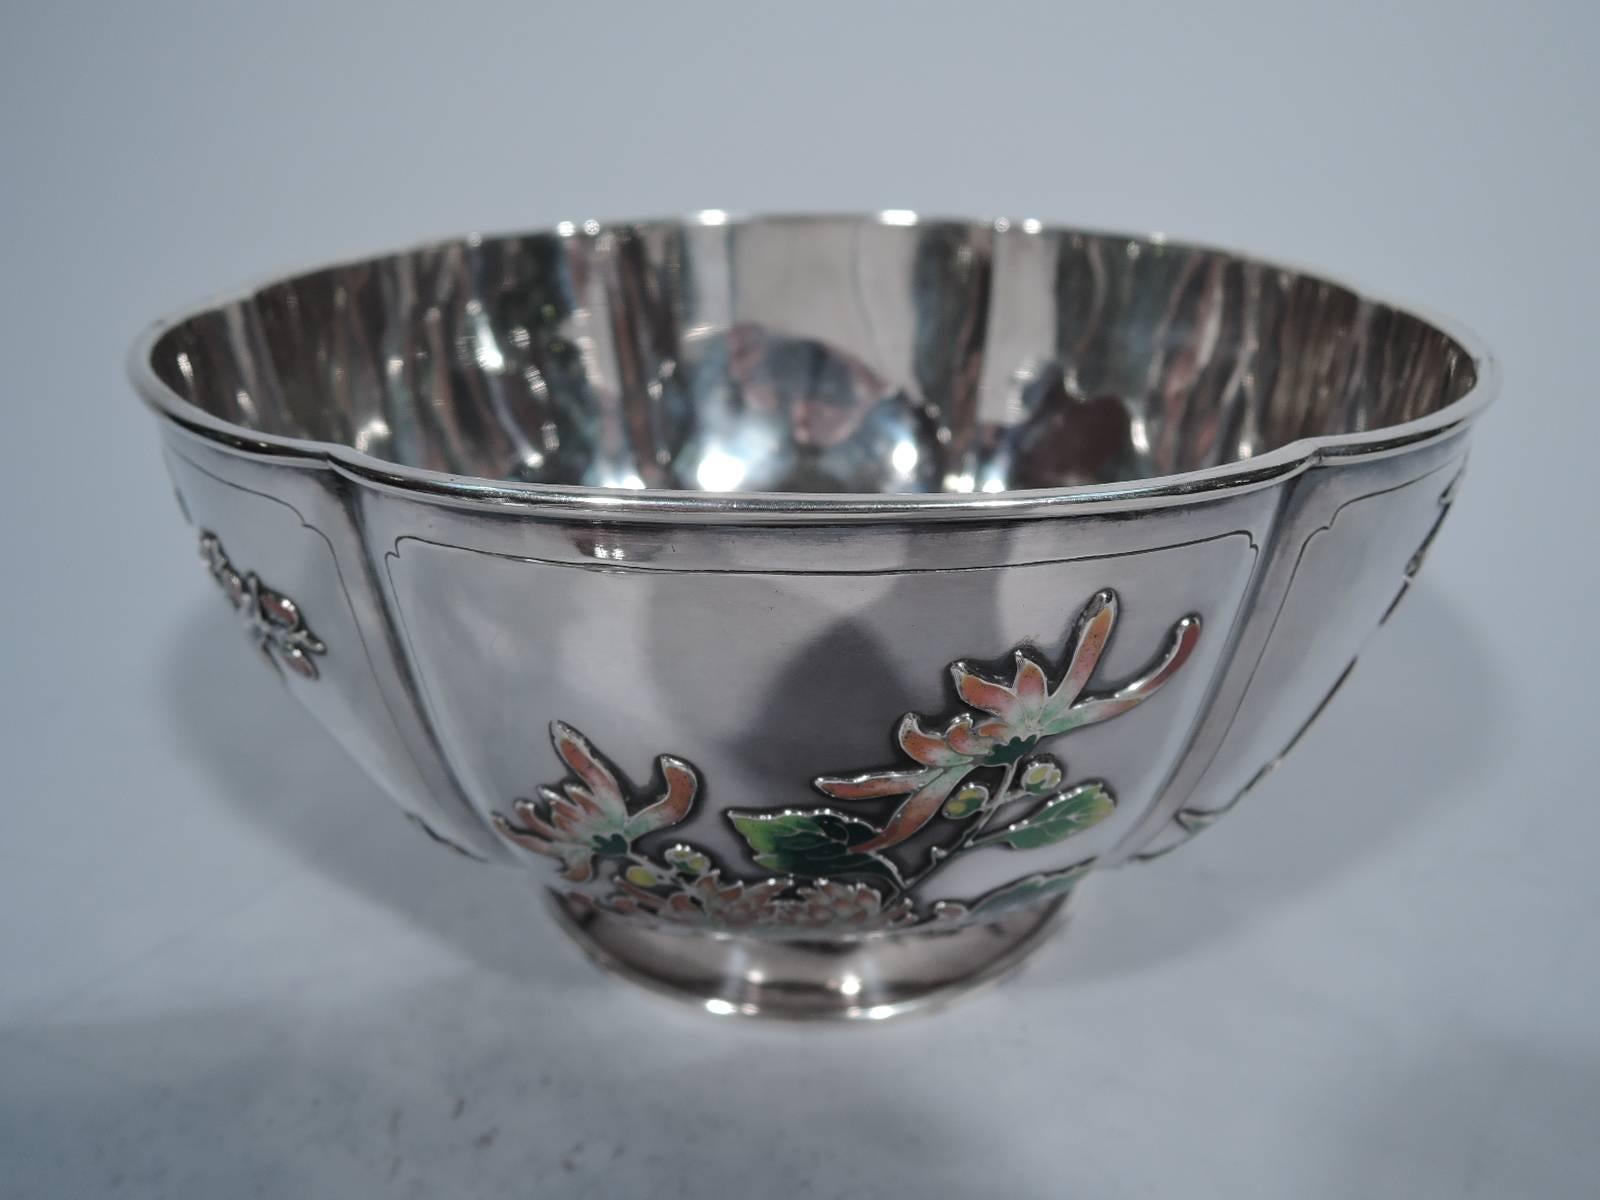 Rare Chinese silver and enamel bowl, circa 1900. Curved and lobed sides. Raised foot. Incised frames with enameled bamboo, chrysanthemum and birds perched on blossoming branches. Wonderful period motifs finely depicted. Hallmark includes Chinese